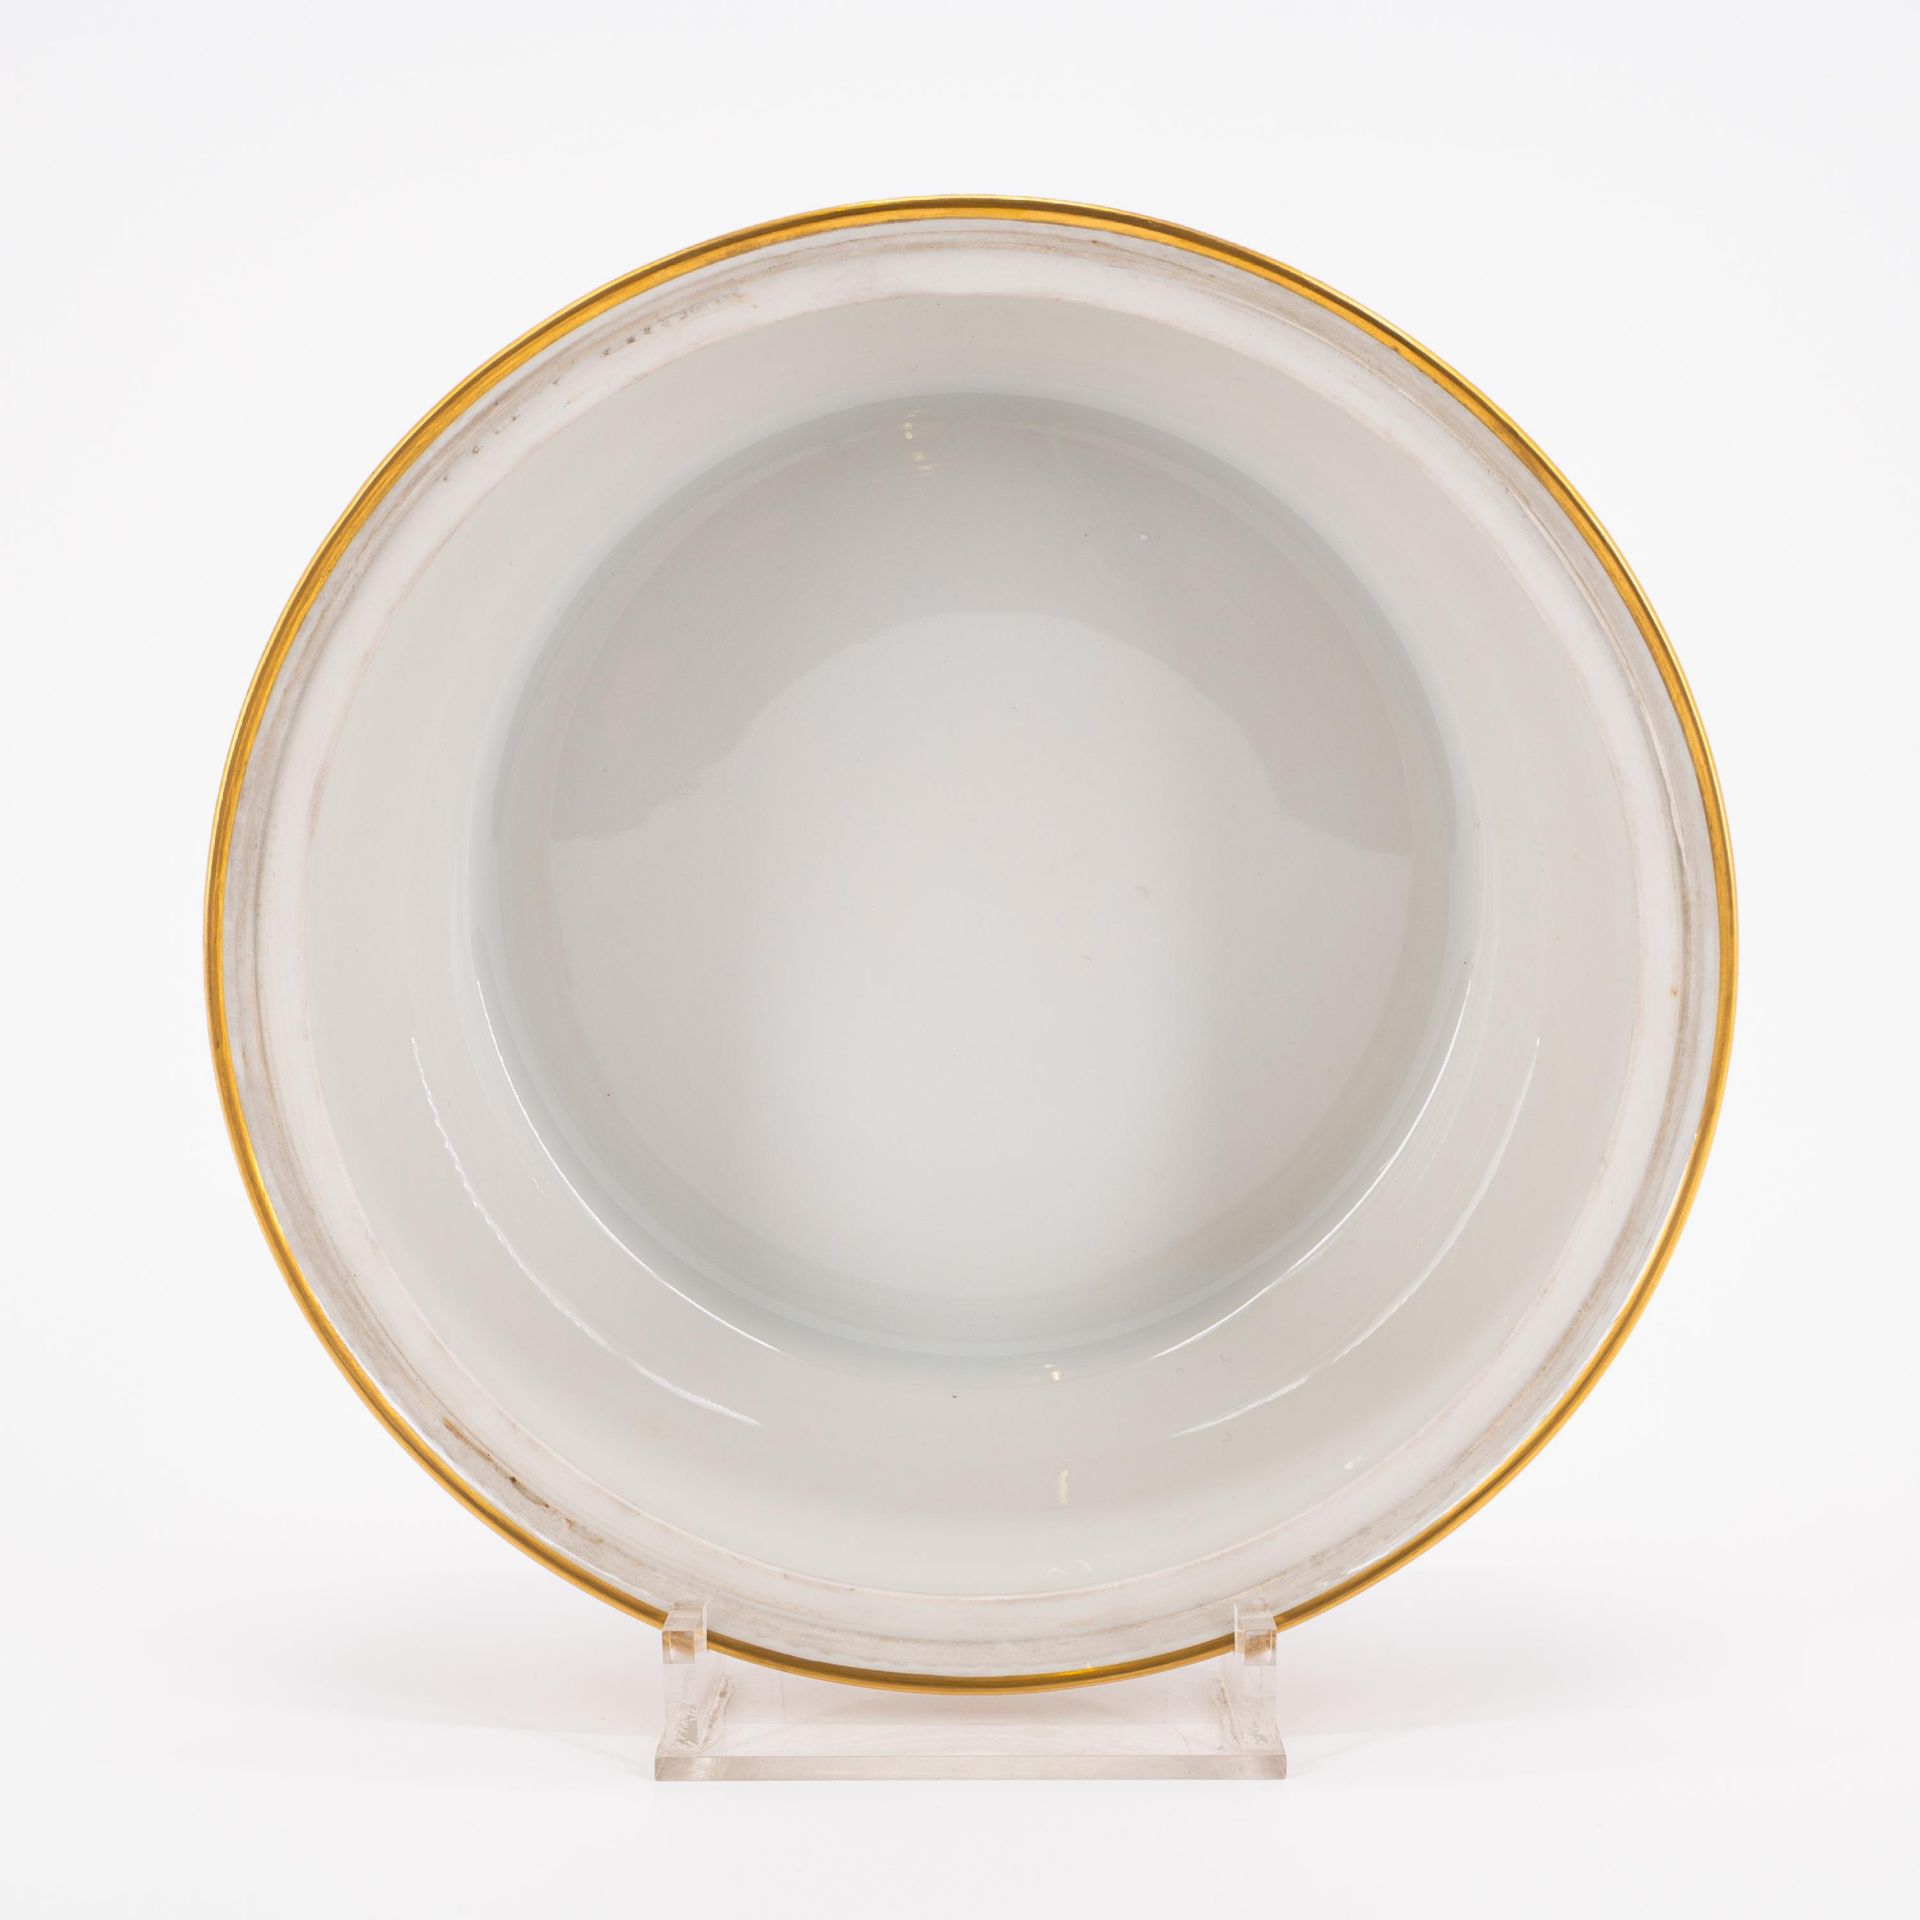 18 PIECES FROM A PORCELAIN DINNER SERVICE 'FLORA DANICA' - Image 18 of 26